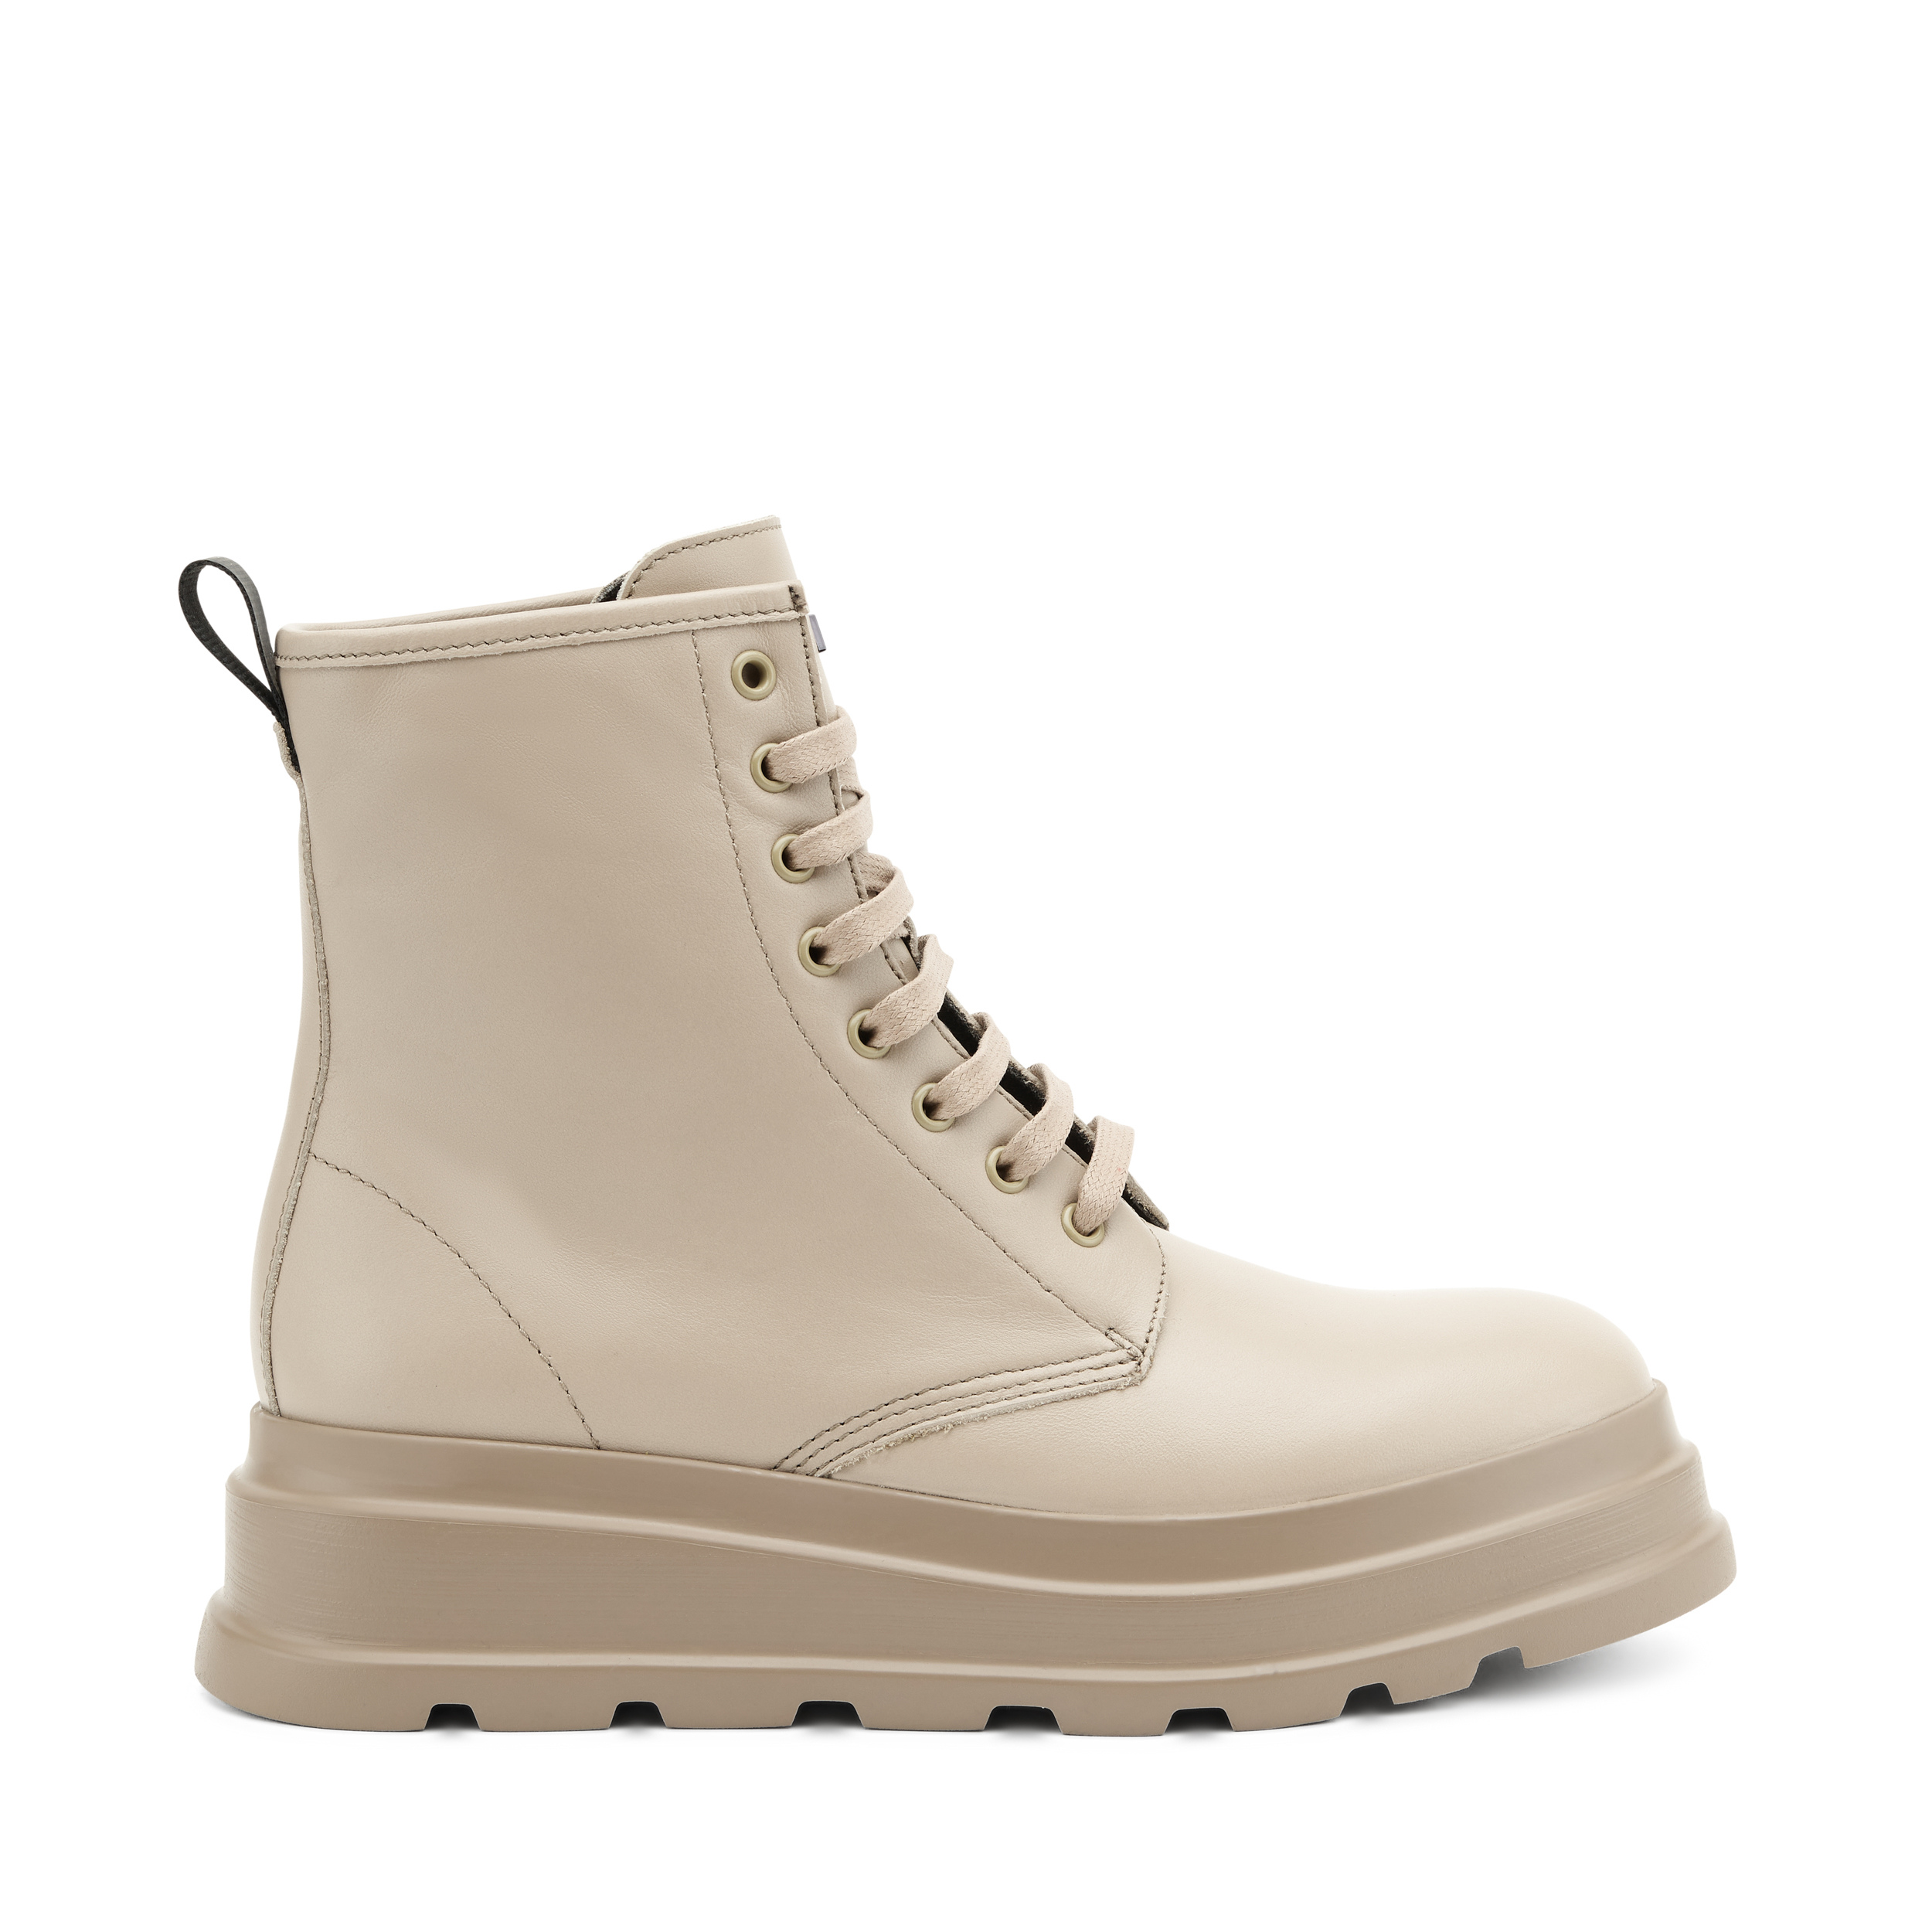 Leather combat boots with platform sole, Col. Chantilly | Frau